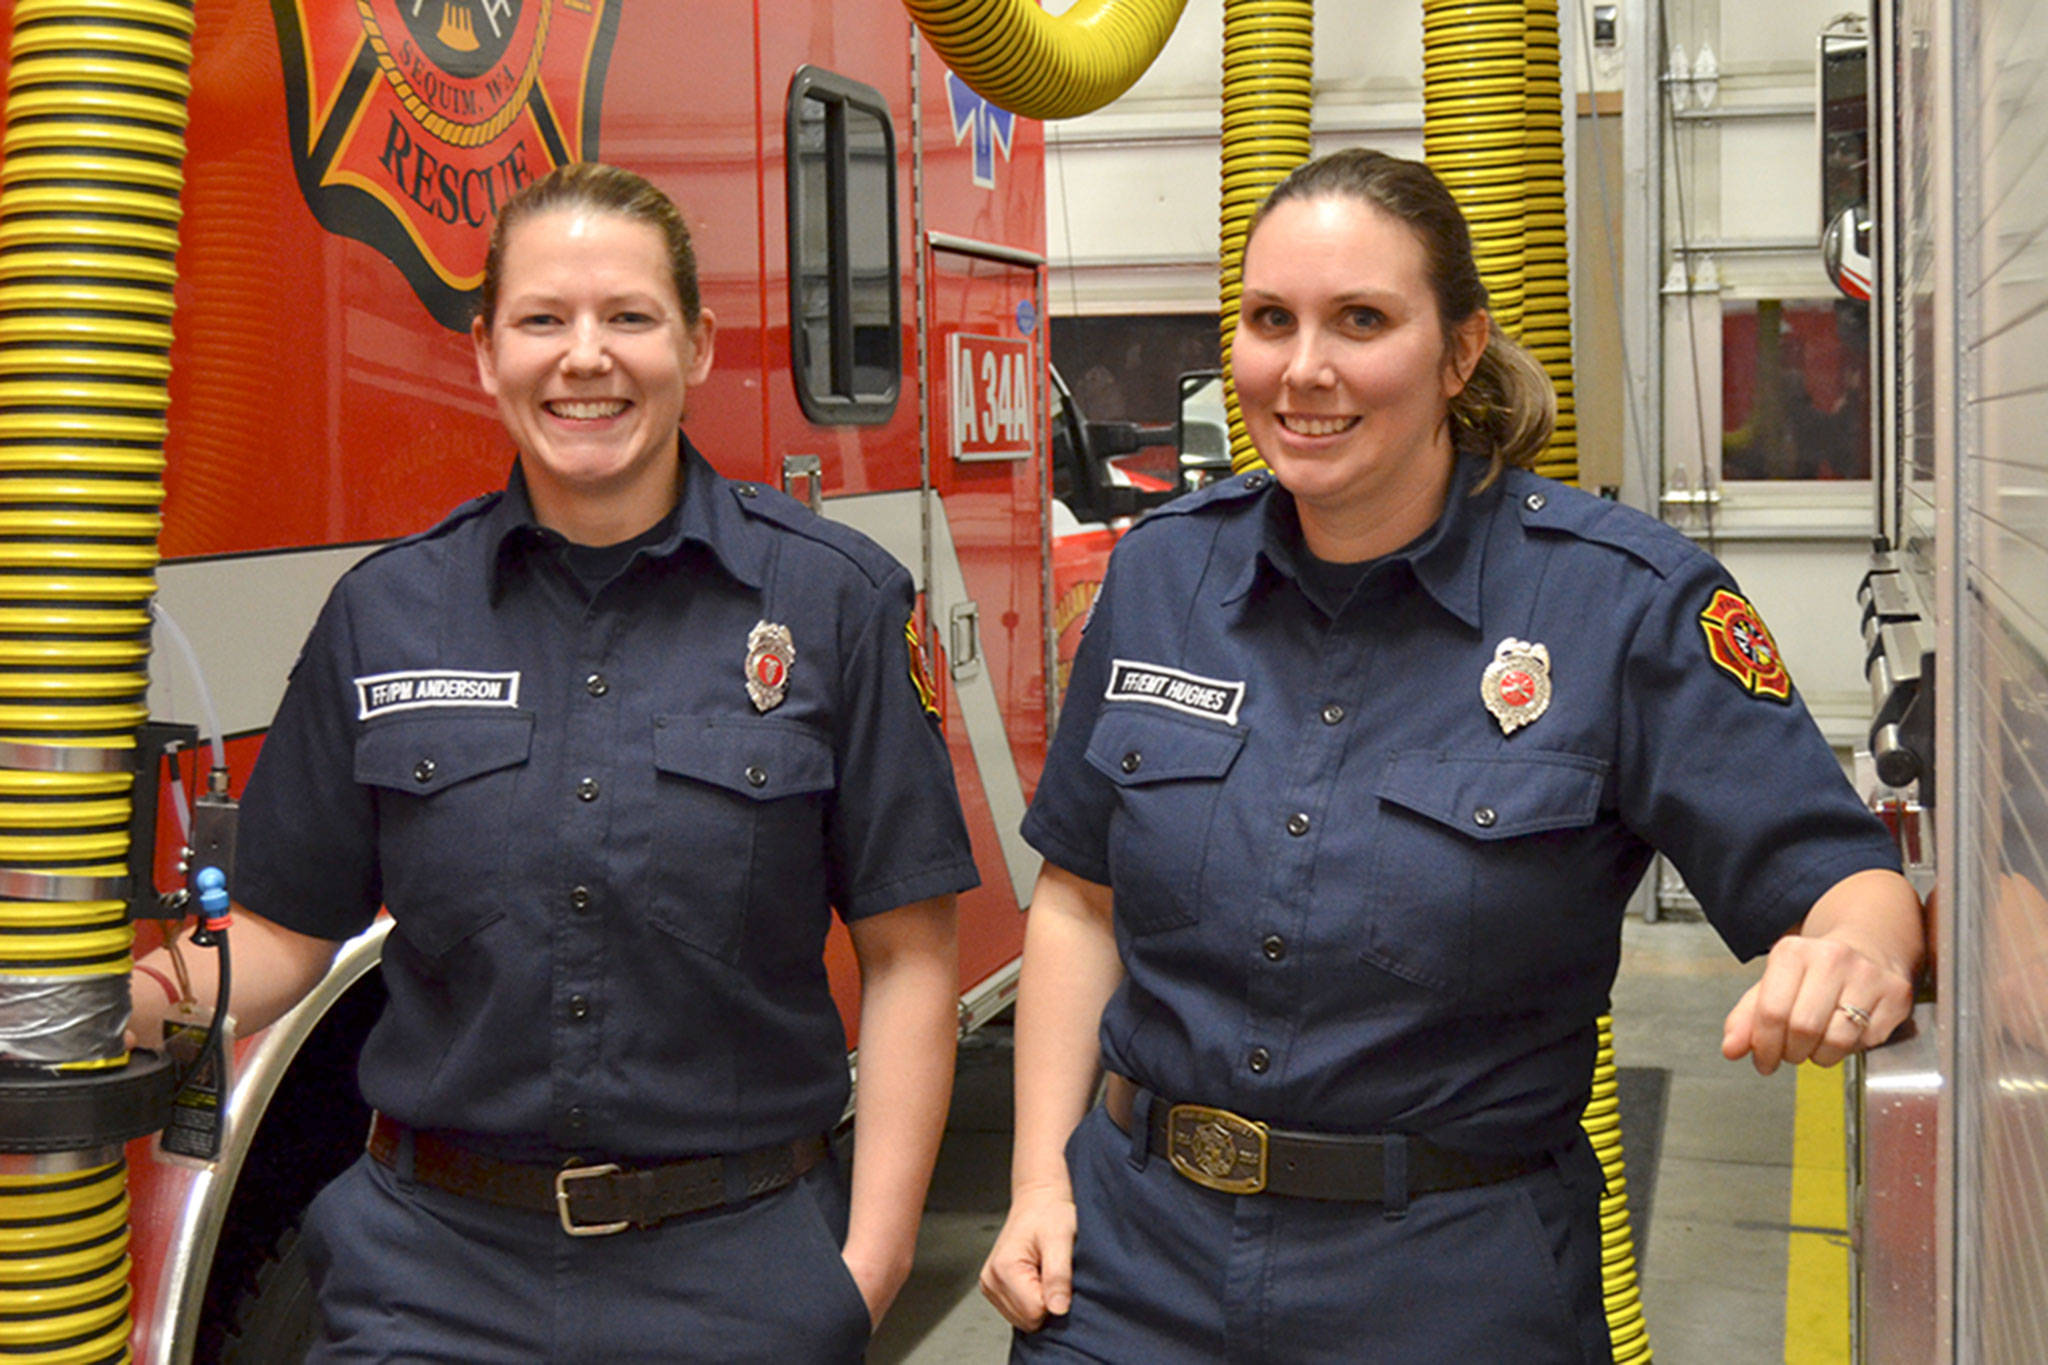 &lt;strong&gt;Matthew Nash&lt;/strong&gt;/Olympic Peninsula News Group                                 According to the National Fire Protection Association, in 2016 women make up about 7 percent of firefighters across the U.S. In Sequim Stefanie Anderson, left, is Clallam County Fire District’s 
No. 3’s only female career firefighter and Anaka Hughes is one of fewer than 10 female volunteer firefighters. In January, they were named Career and Volunteer Firefighters of 2017.